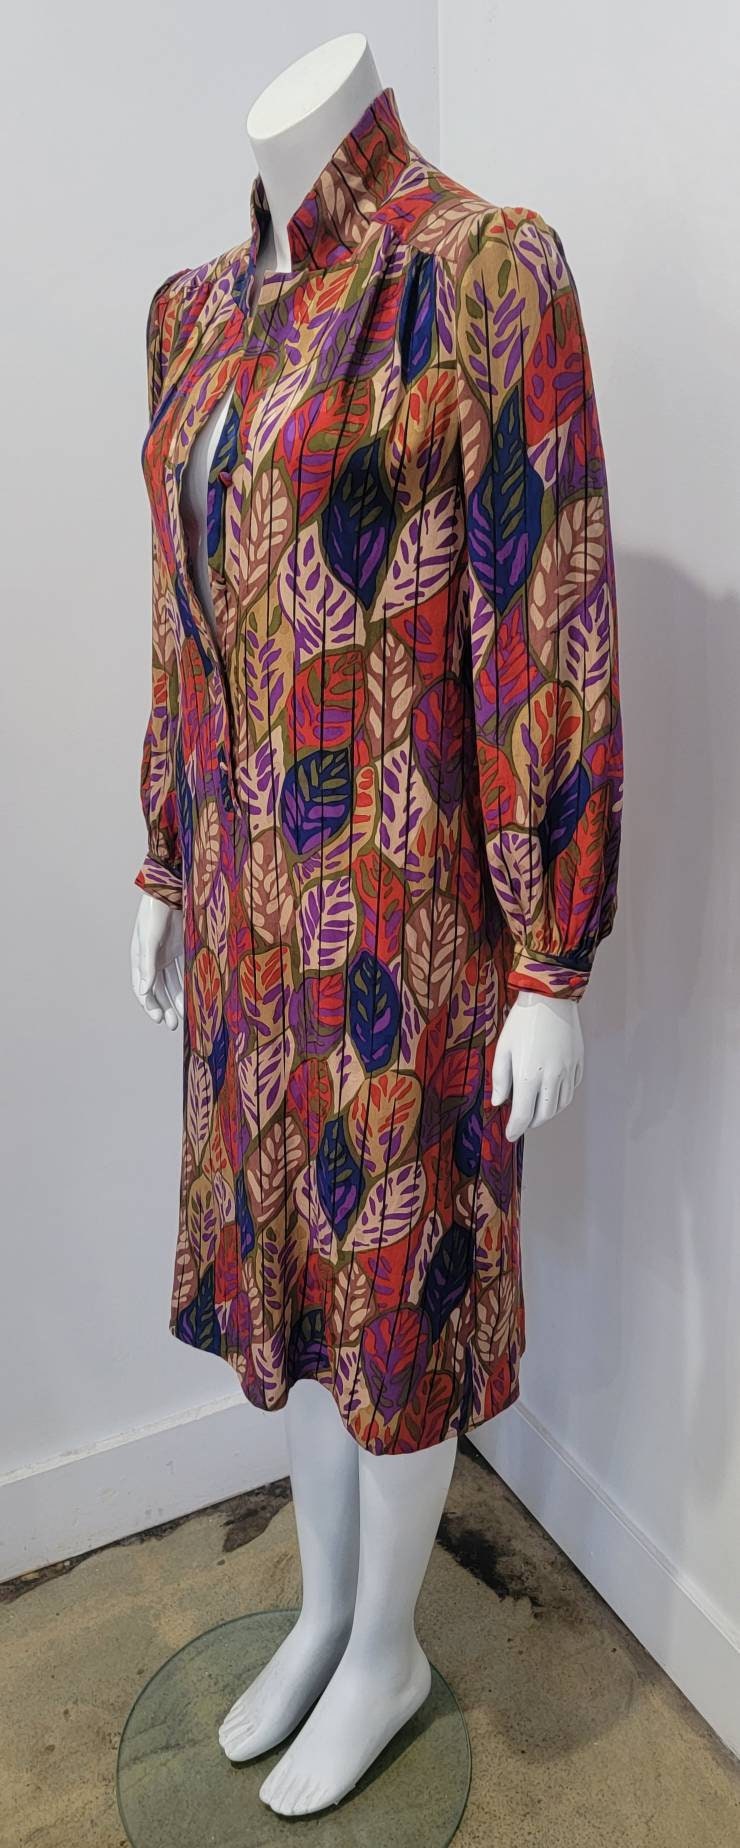 Vintage 70s Abstract Jacquard Leaf Stripe Print Henley Shift Dress by Soo Yung Lee